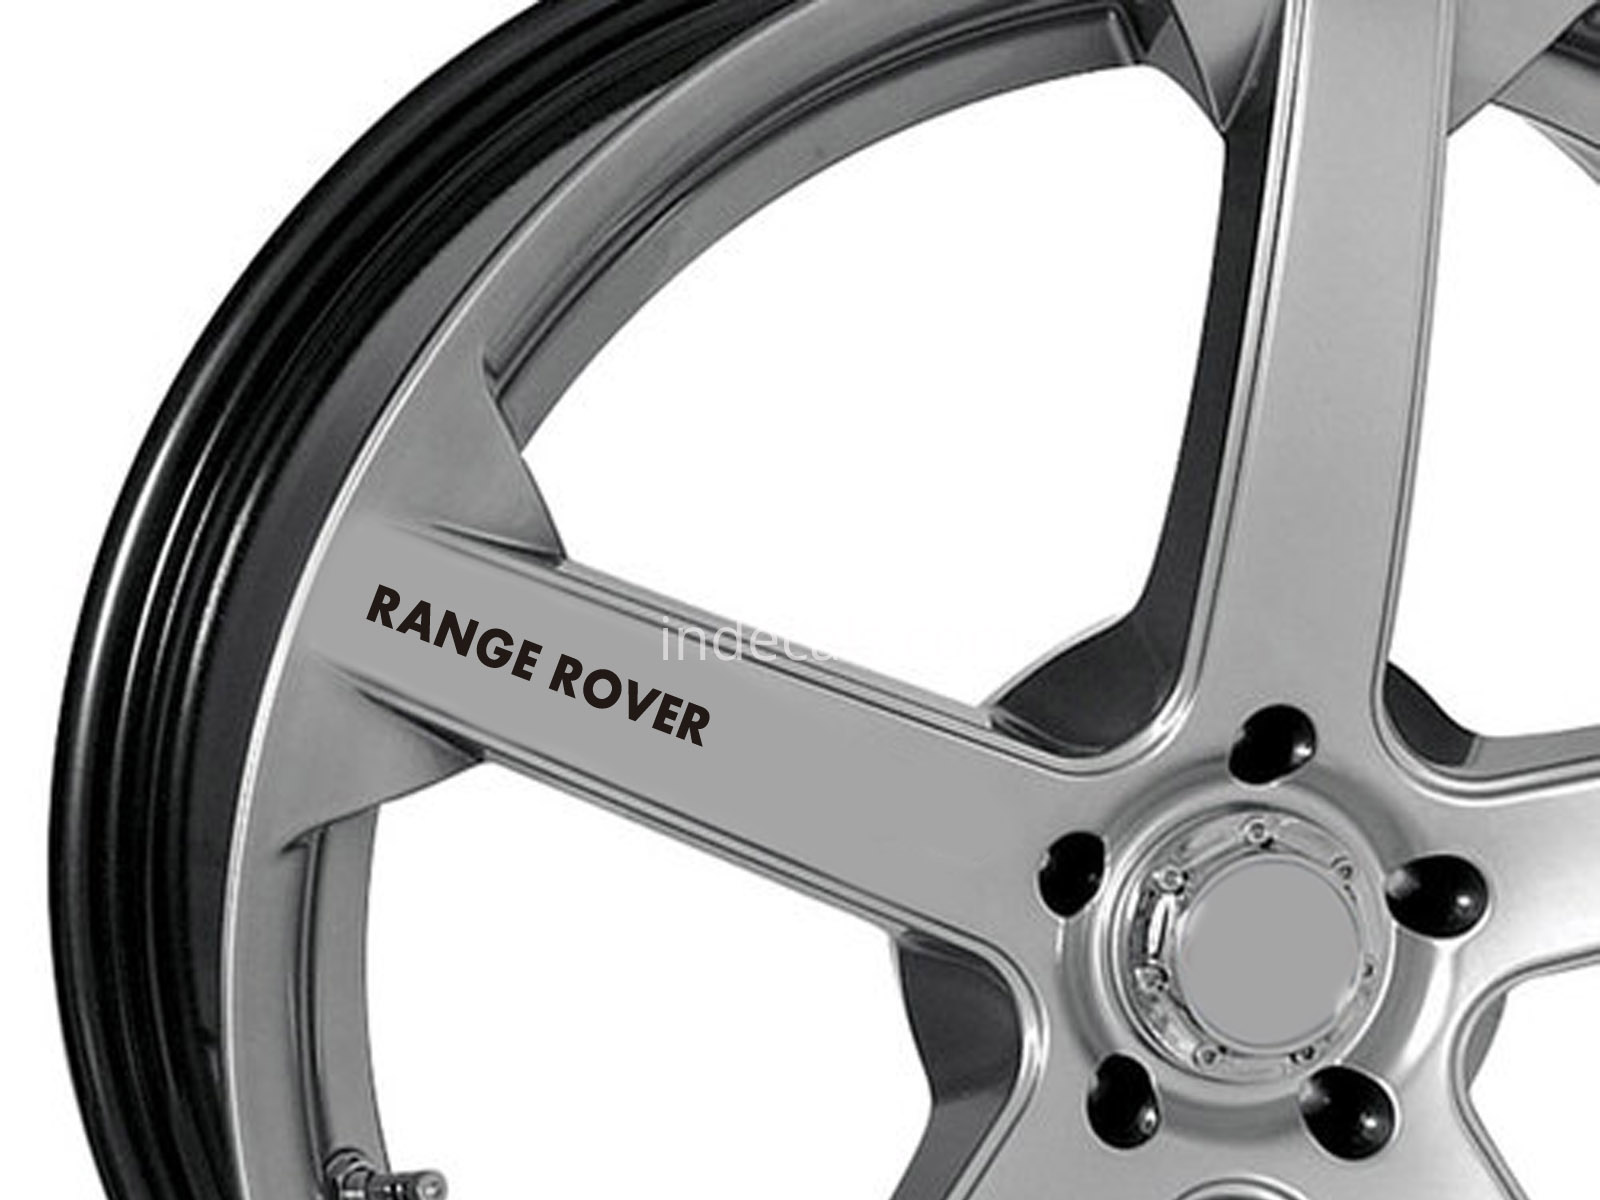 6 x Range Rover Stickers for Wheels - Black